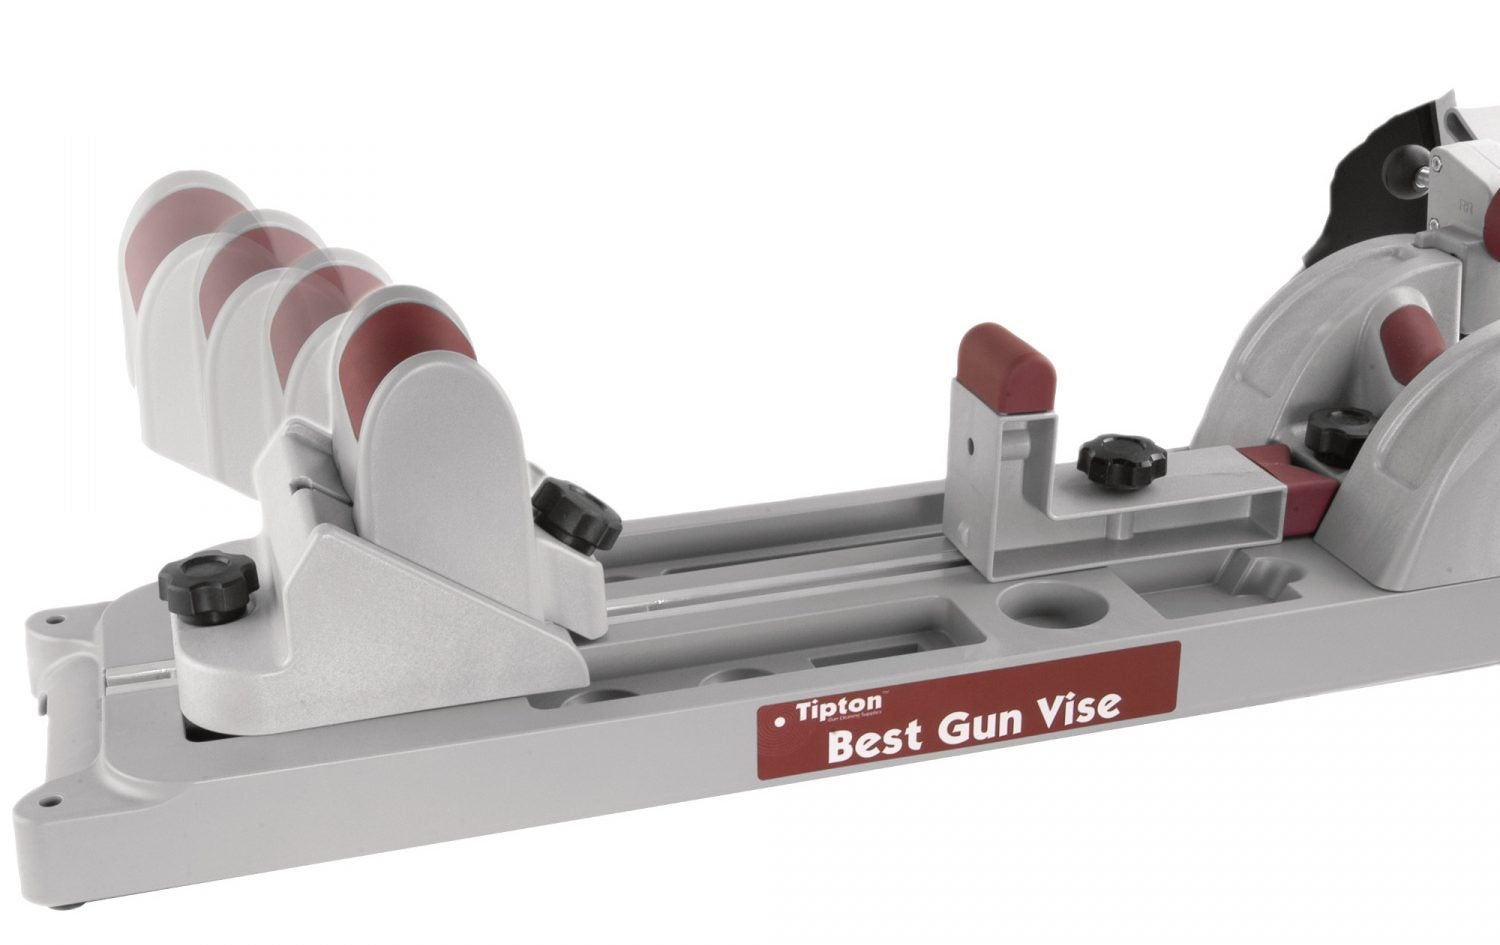 TFB Weekly Web Deals 18: Gunsmithing Tools and Accessories